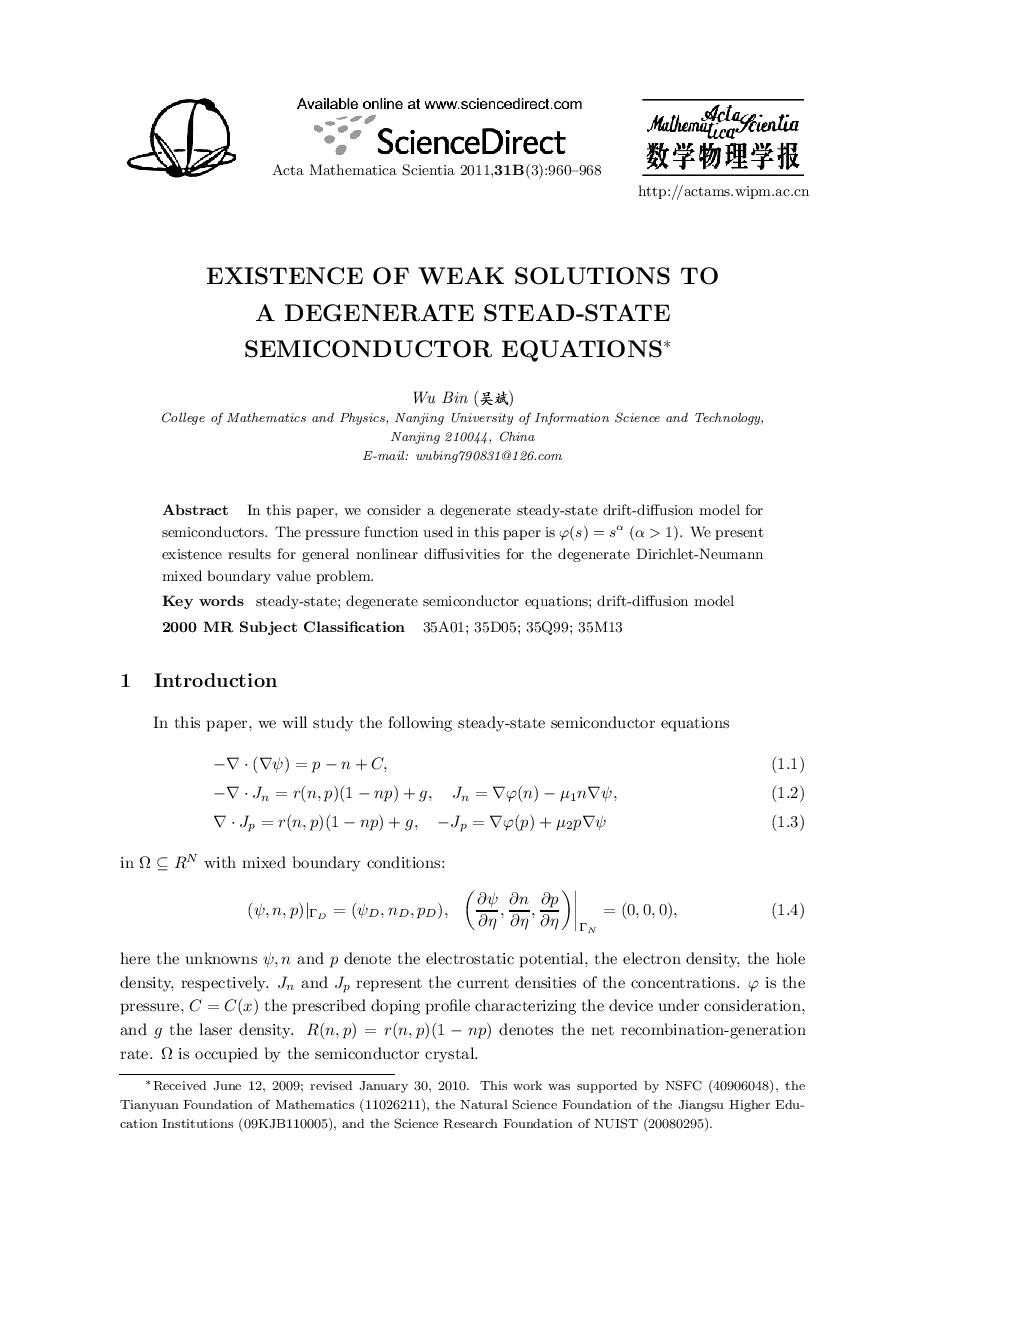 Existence of weak solutions to a degenerate stead-state semiconductor equations 